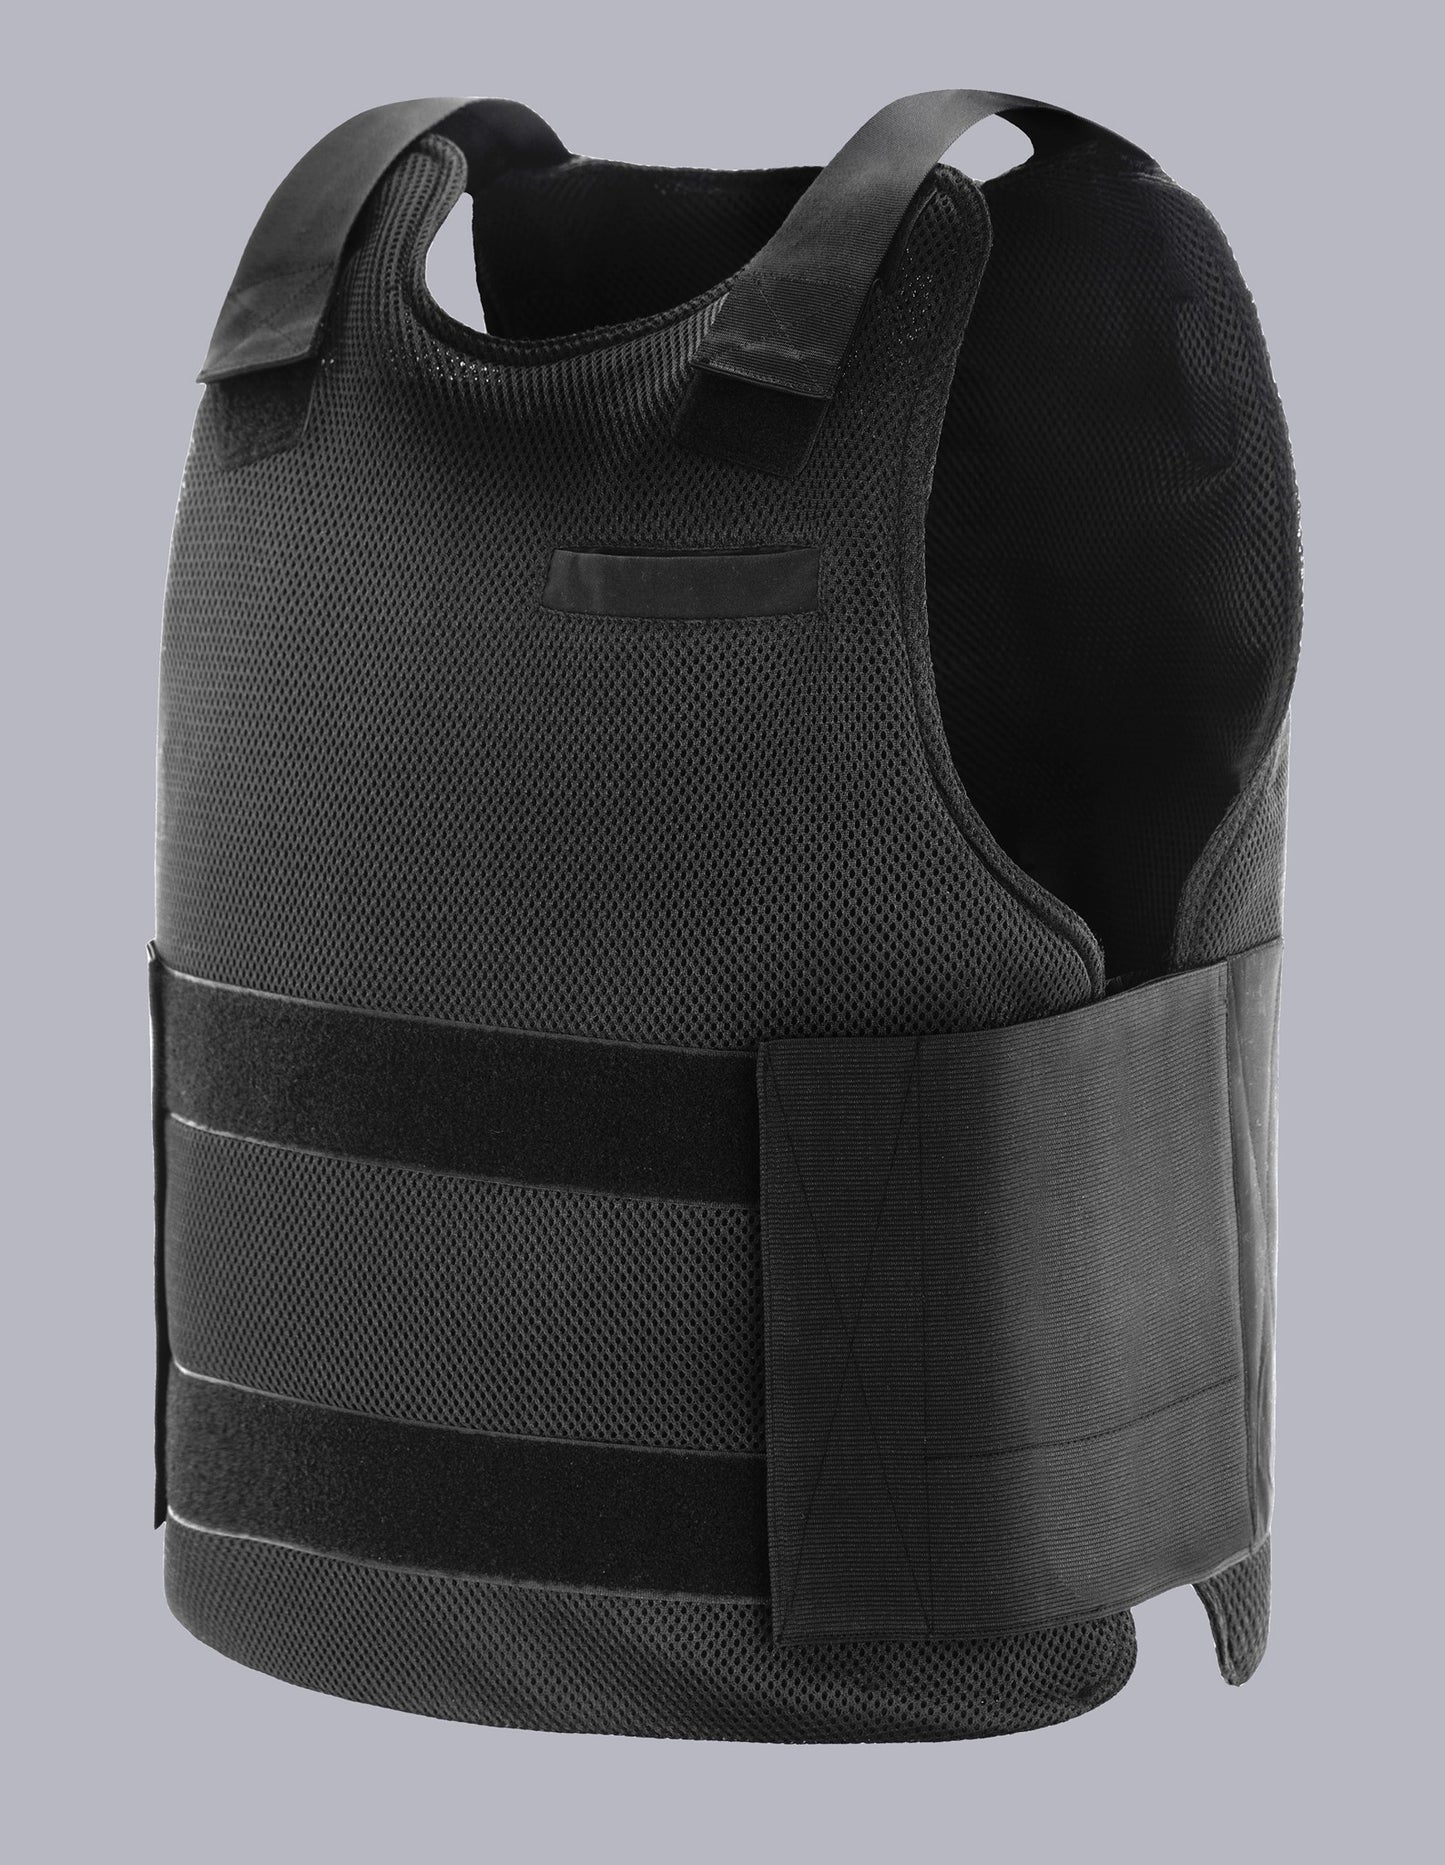 SIGNATURE Covert Stab Vest - SPECIAL IN STOCK DEAL!